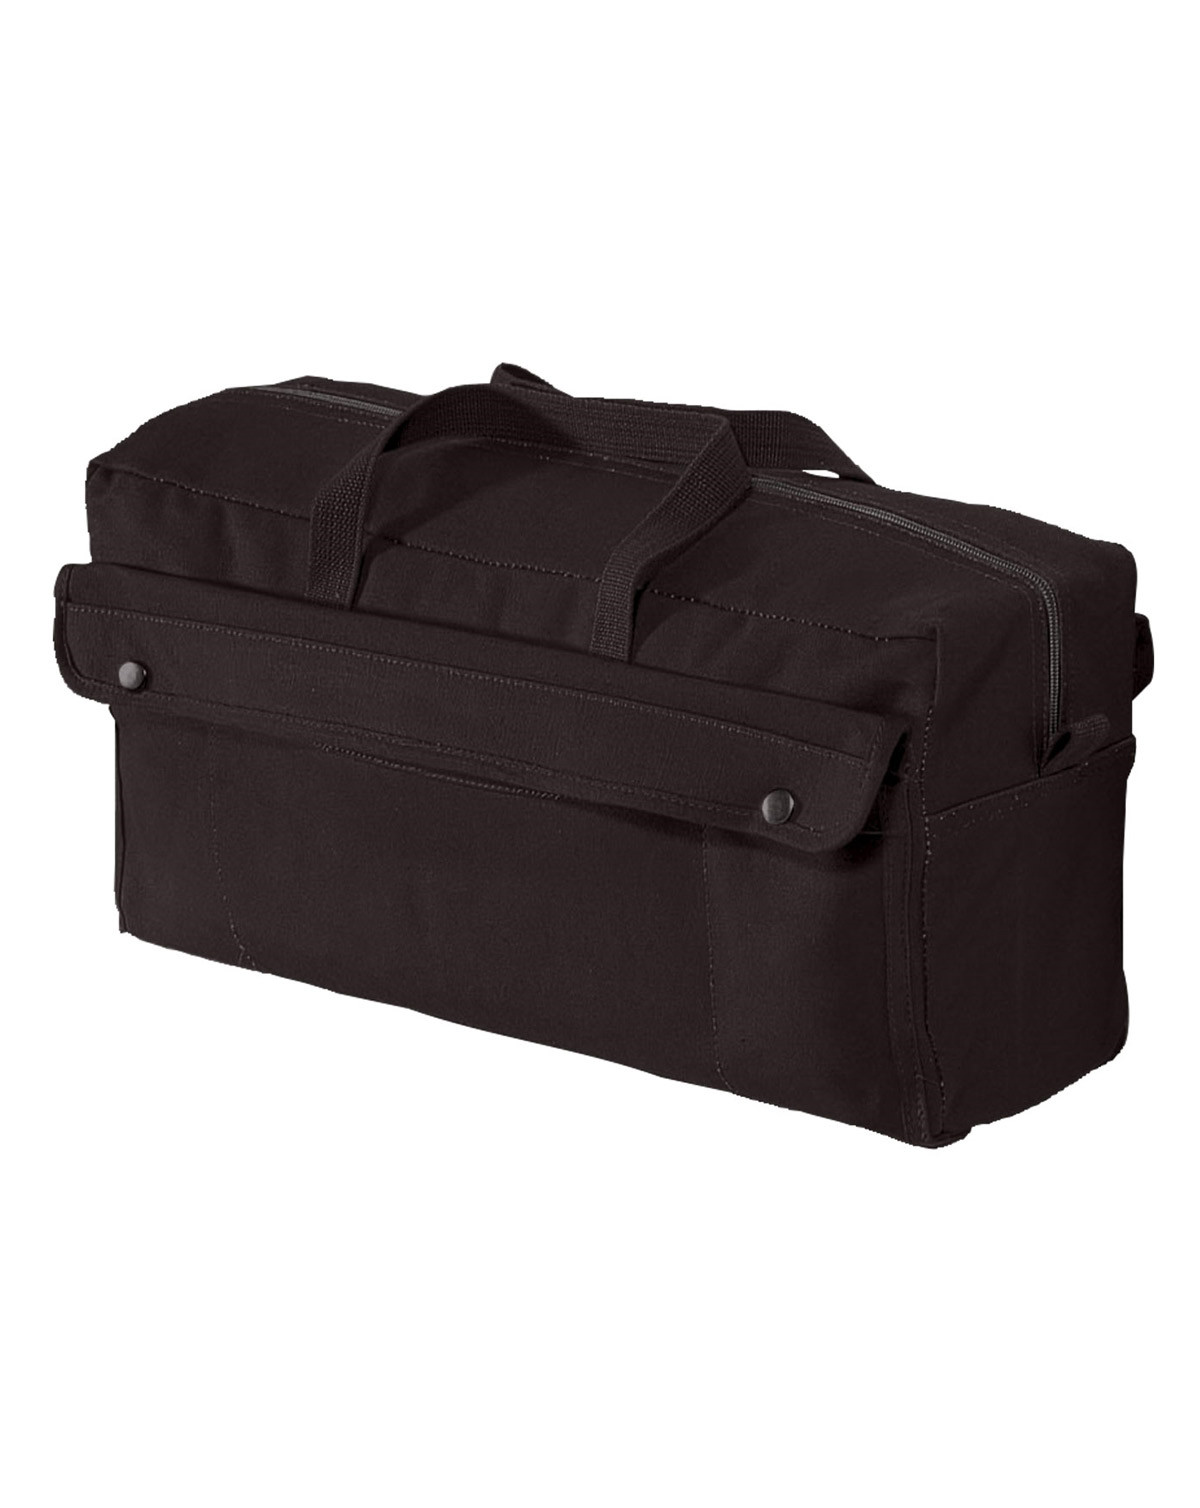 Details about   Mechanics Canvas Tool Bag Military Stamped Heavy Duty with Outer Pockets 